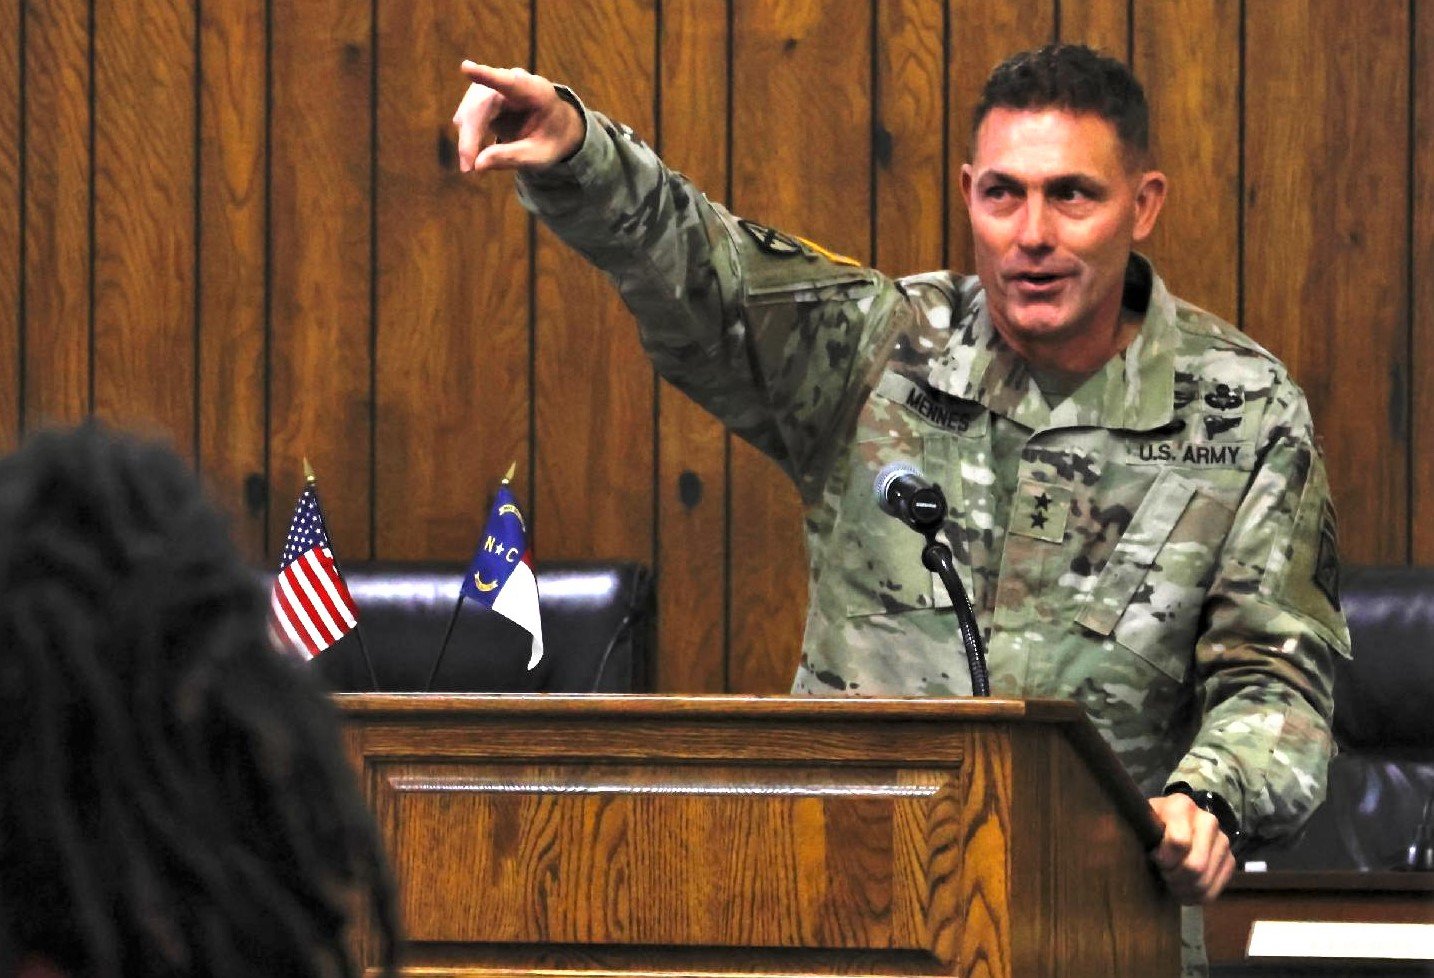 Maj. Gen. Brian Mennes, deputy commanding general of the 18th Airborne Corps, told the Mayors Coalition that Fort Bragg is part of the community. He also explained the process of choosing Fort Liberty as the post’s new name.